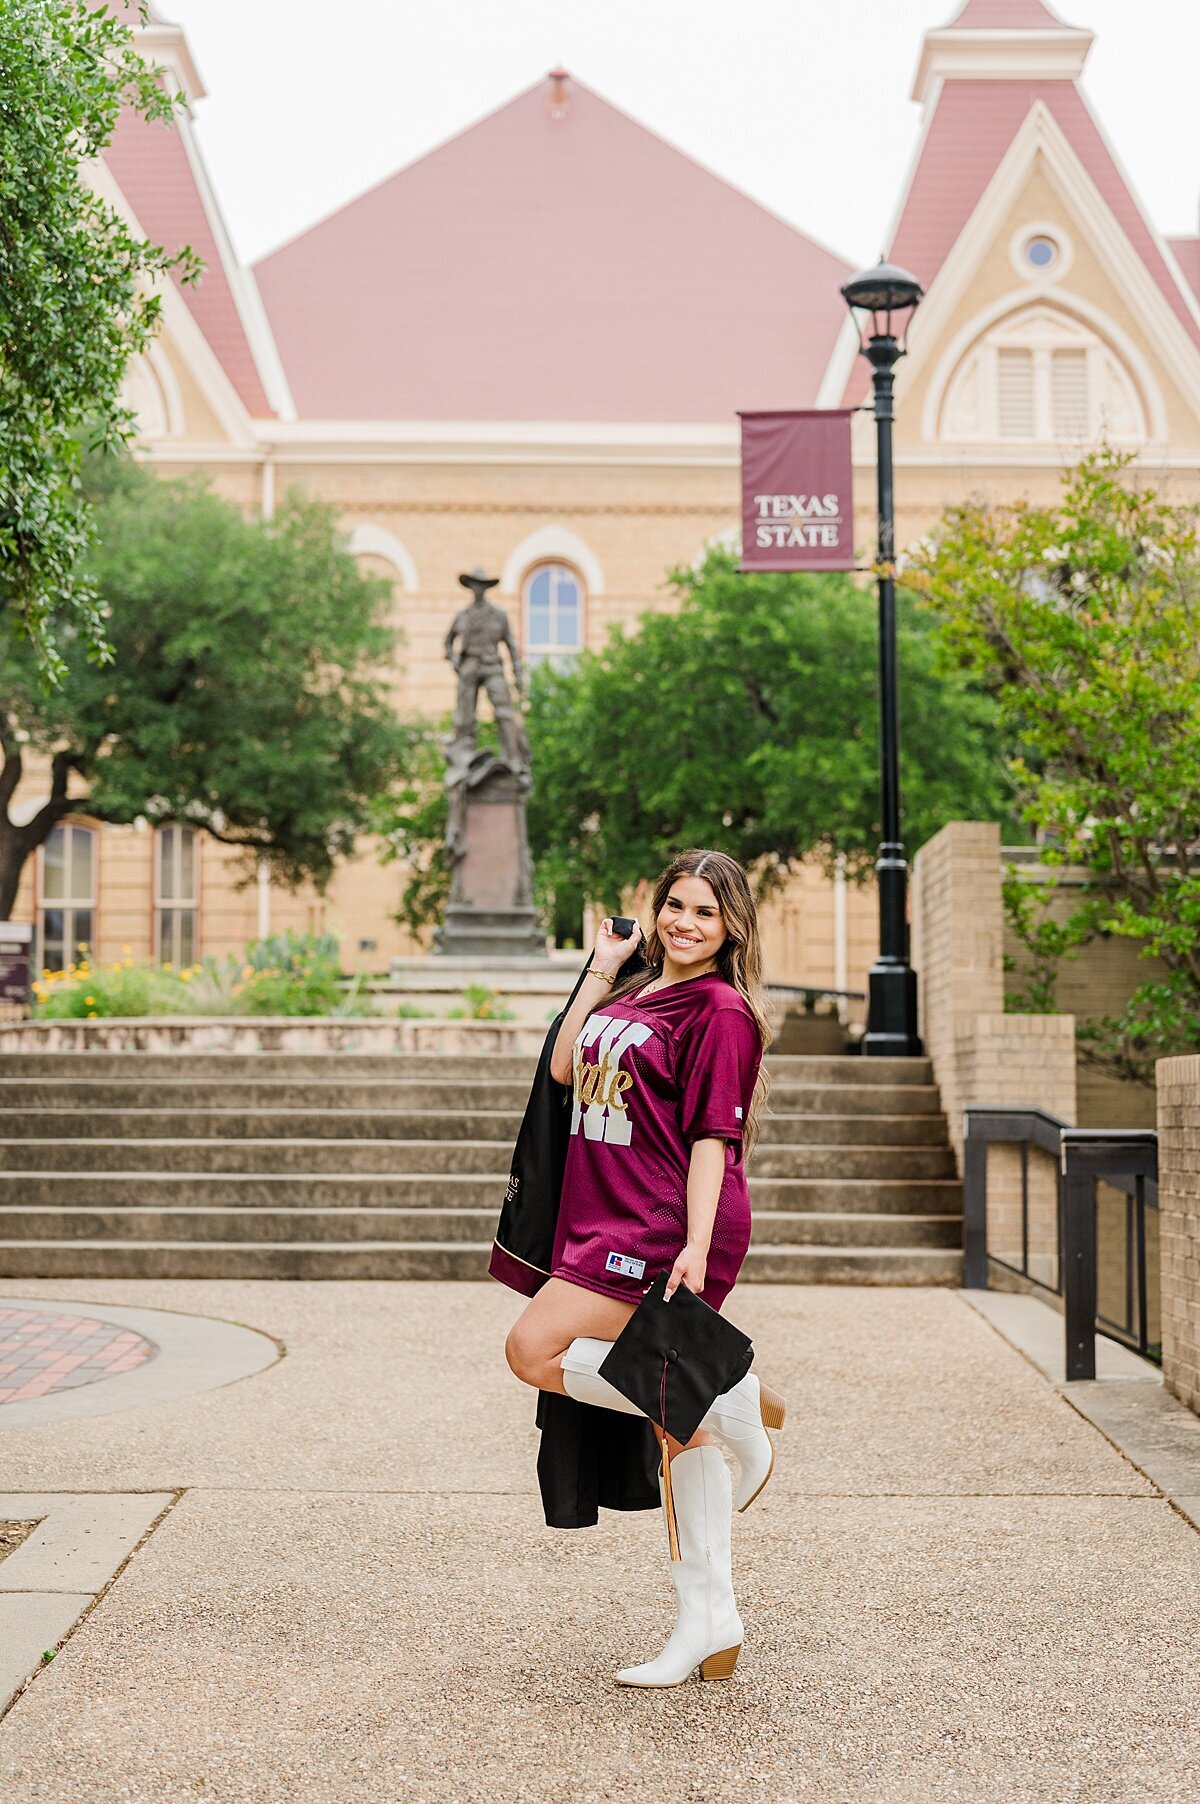 Texas State Graduation Photo by Old Main